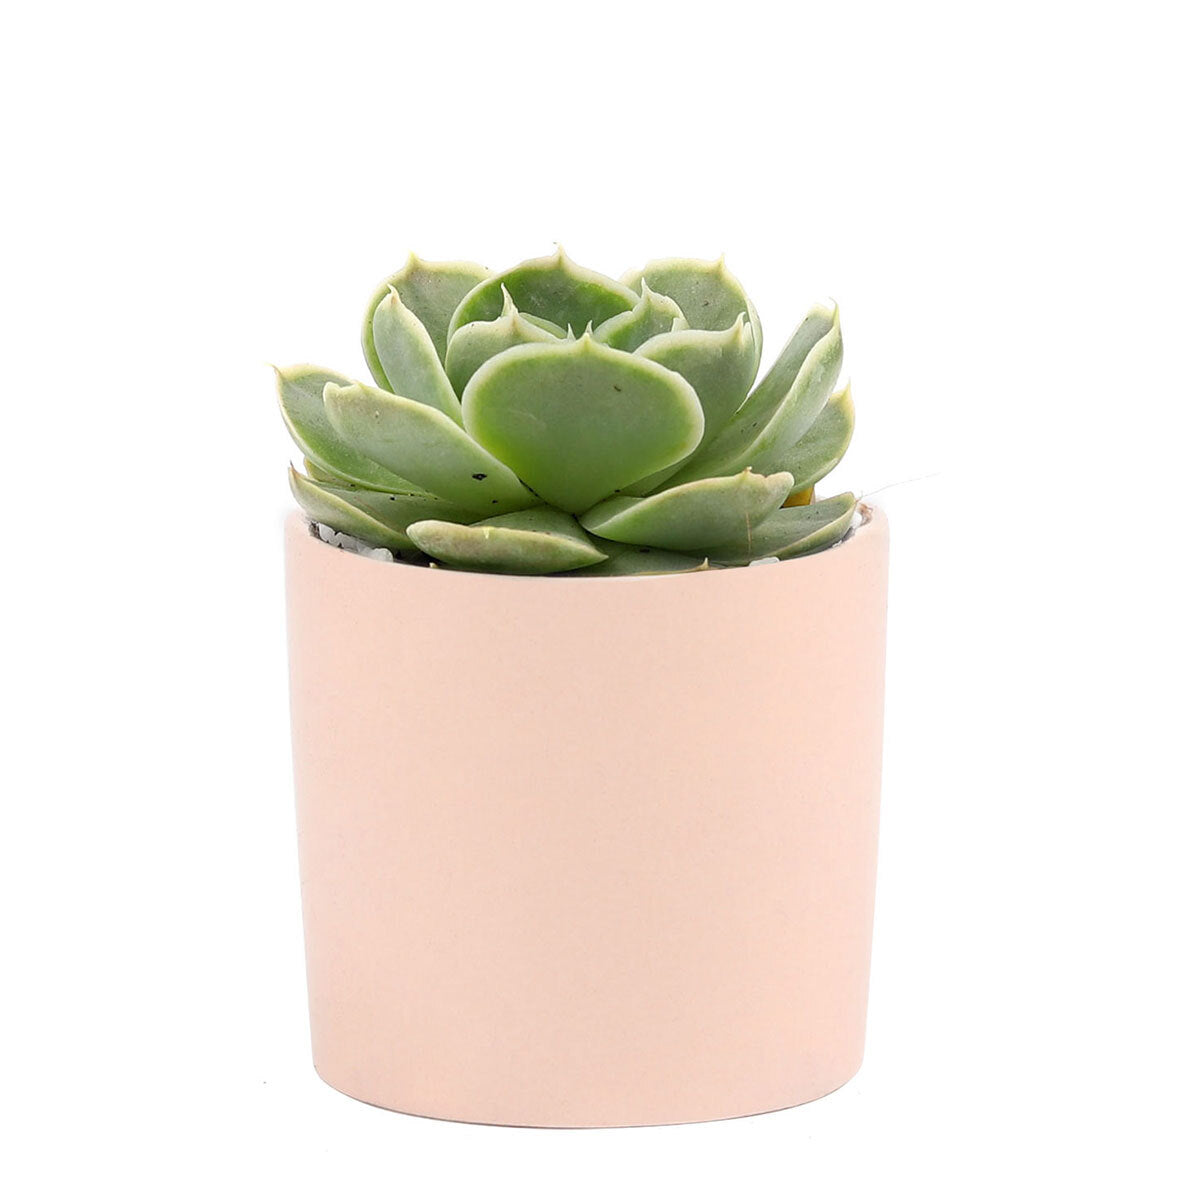 Succulent with Small Modern Cylinder Pot, Unique Succulent Gift Ideas, Succulent in ceramic pots, Succulent Decor Ideas, 2 inch succulent pots for sale, EcoFriendly Succulent Gift Box for Employee, Corporate Gift Succulents For Sale Online, Succulent Thank You Gift Ideas, Thank you gift for your staff in 2023, Customizable Gift Boxes for employees and clients, Office gift for employees, Employee appreciation day 2023 ideas, Succulent Plants for Clients & Employees for sale 